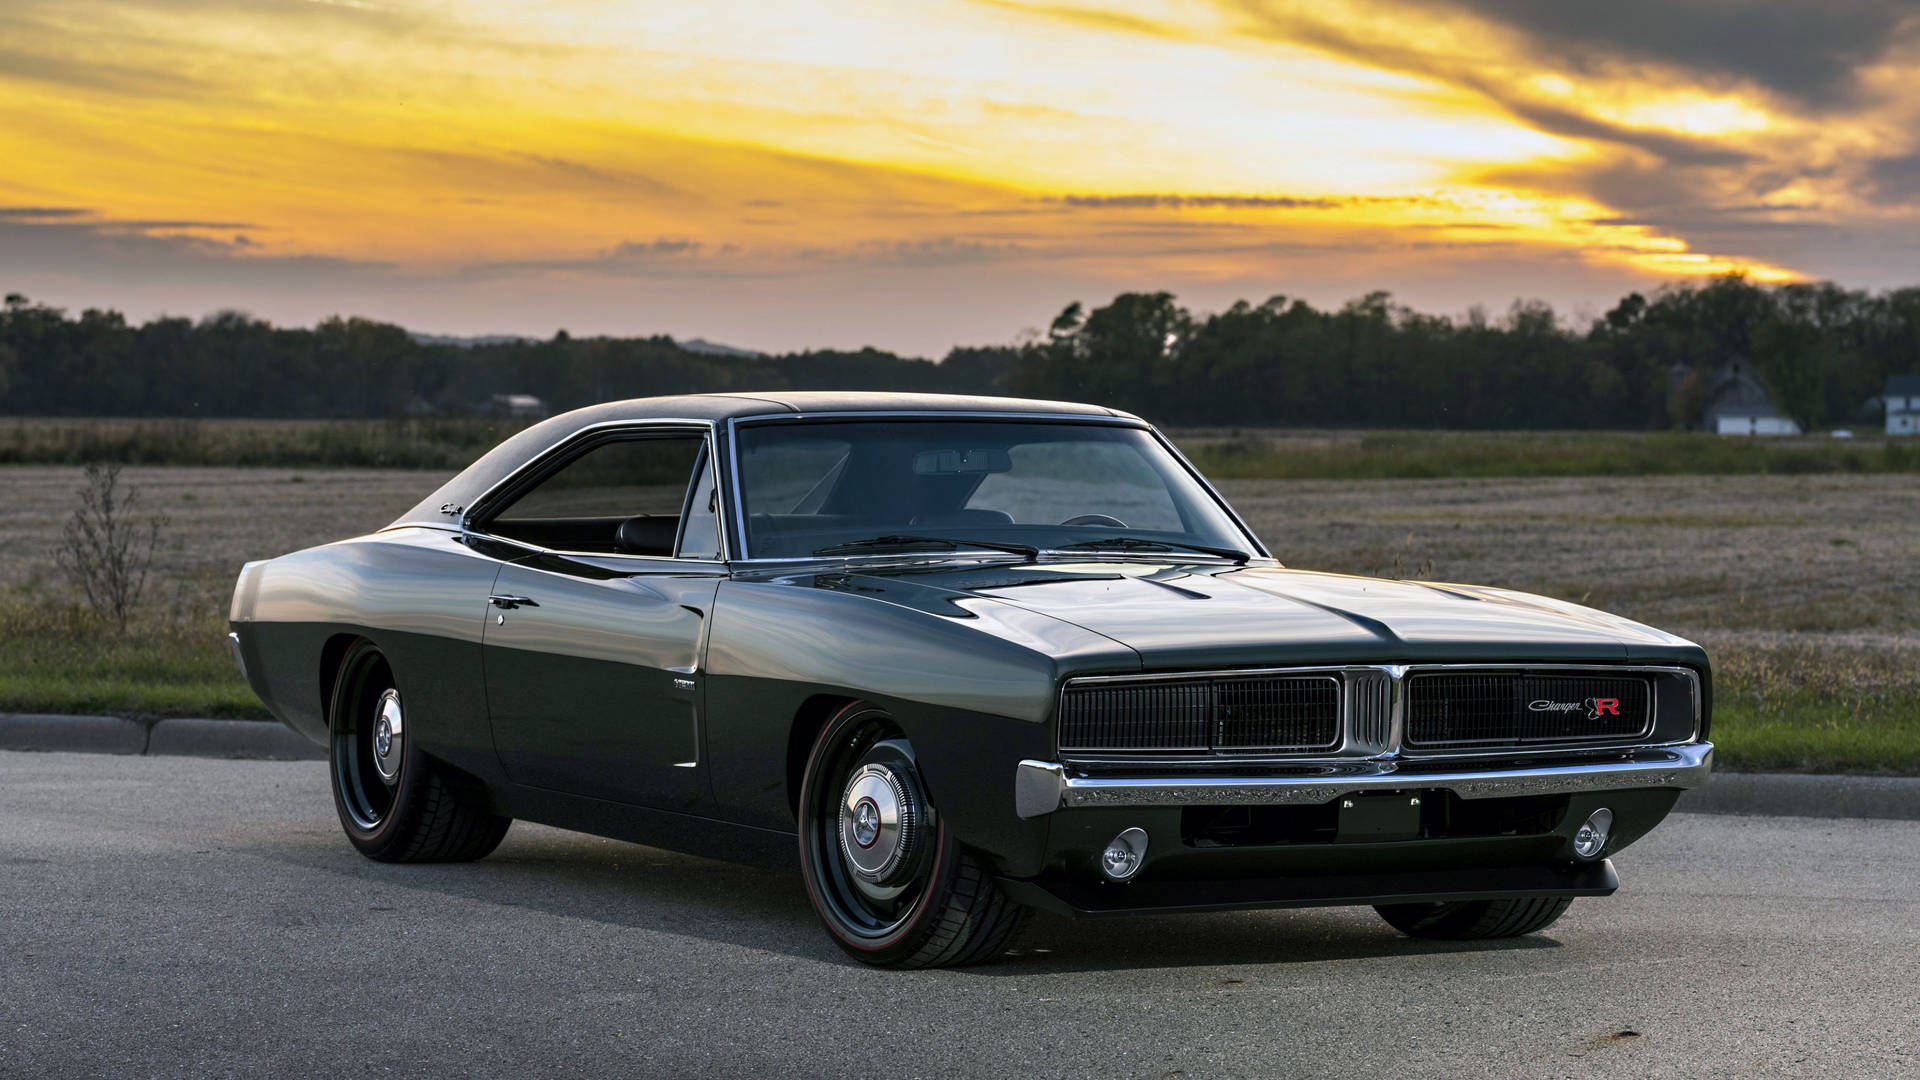 Caption: Classic Elegance with Power - 1969 Dodge Charger Defector Wallpaper